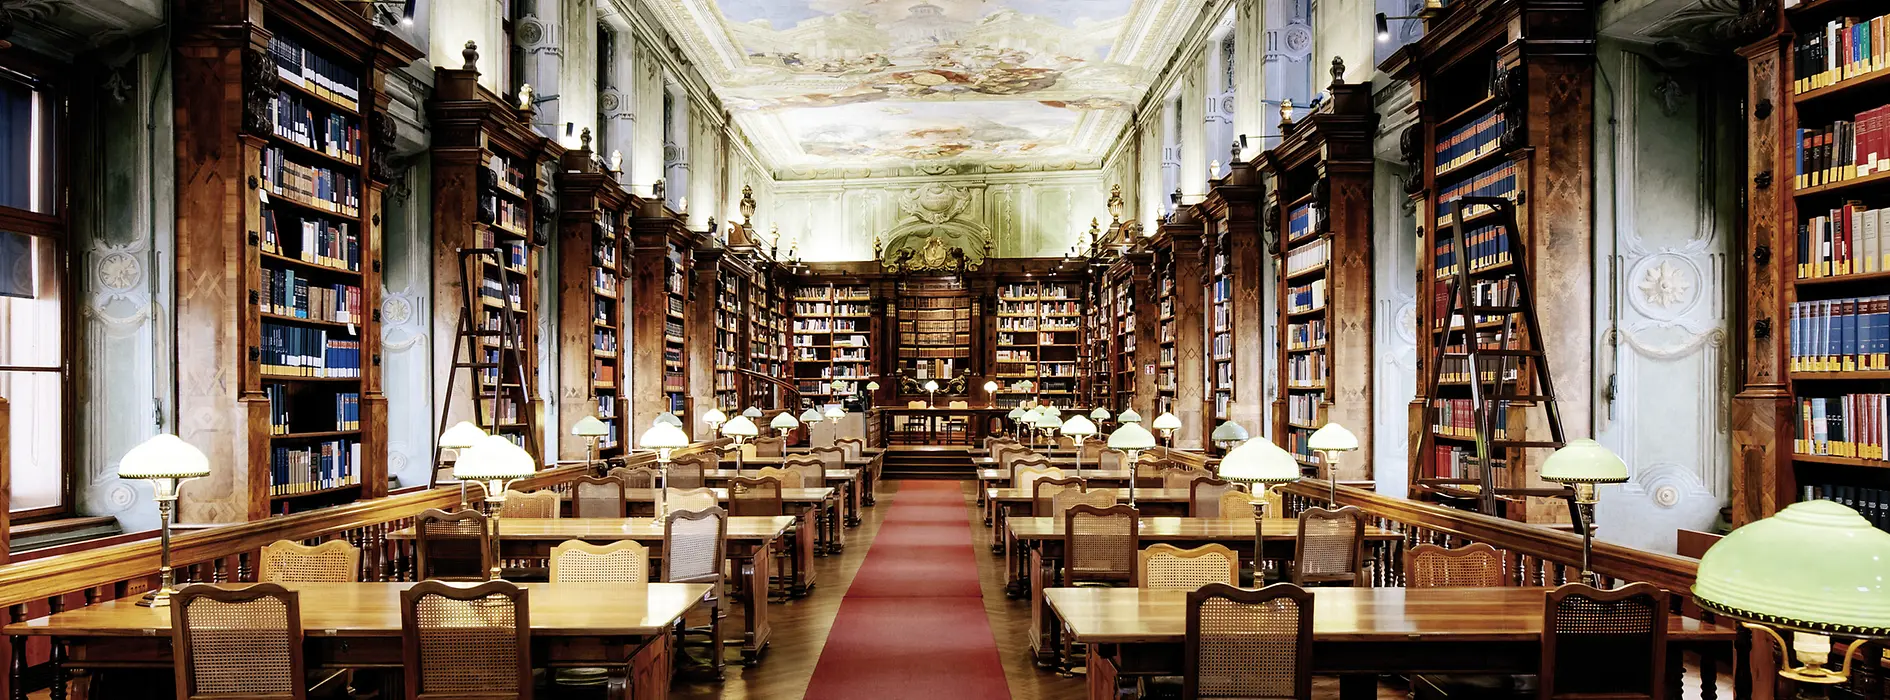 Reading room at the National Library in Vienna